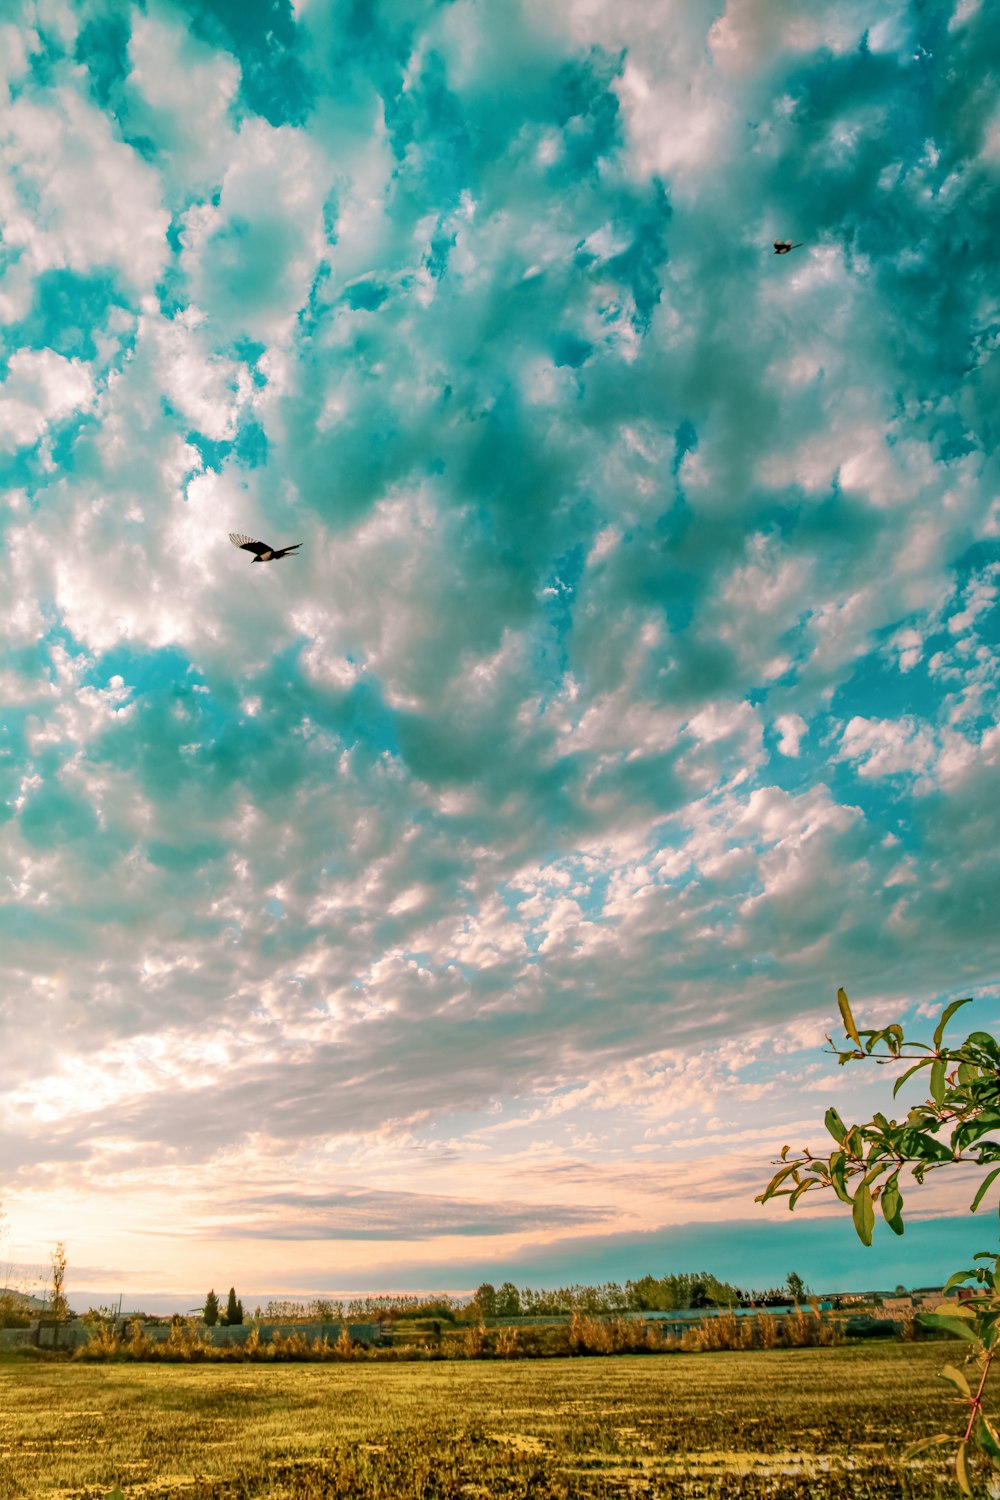 black bird flying over green plants under blue and white cloudy sky during daytime